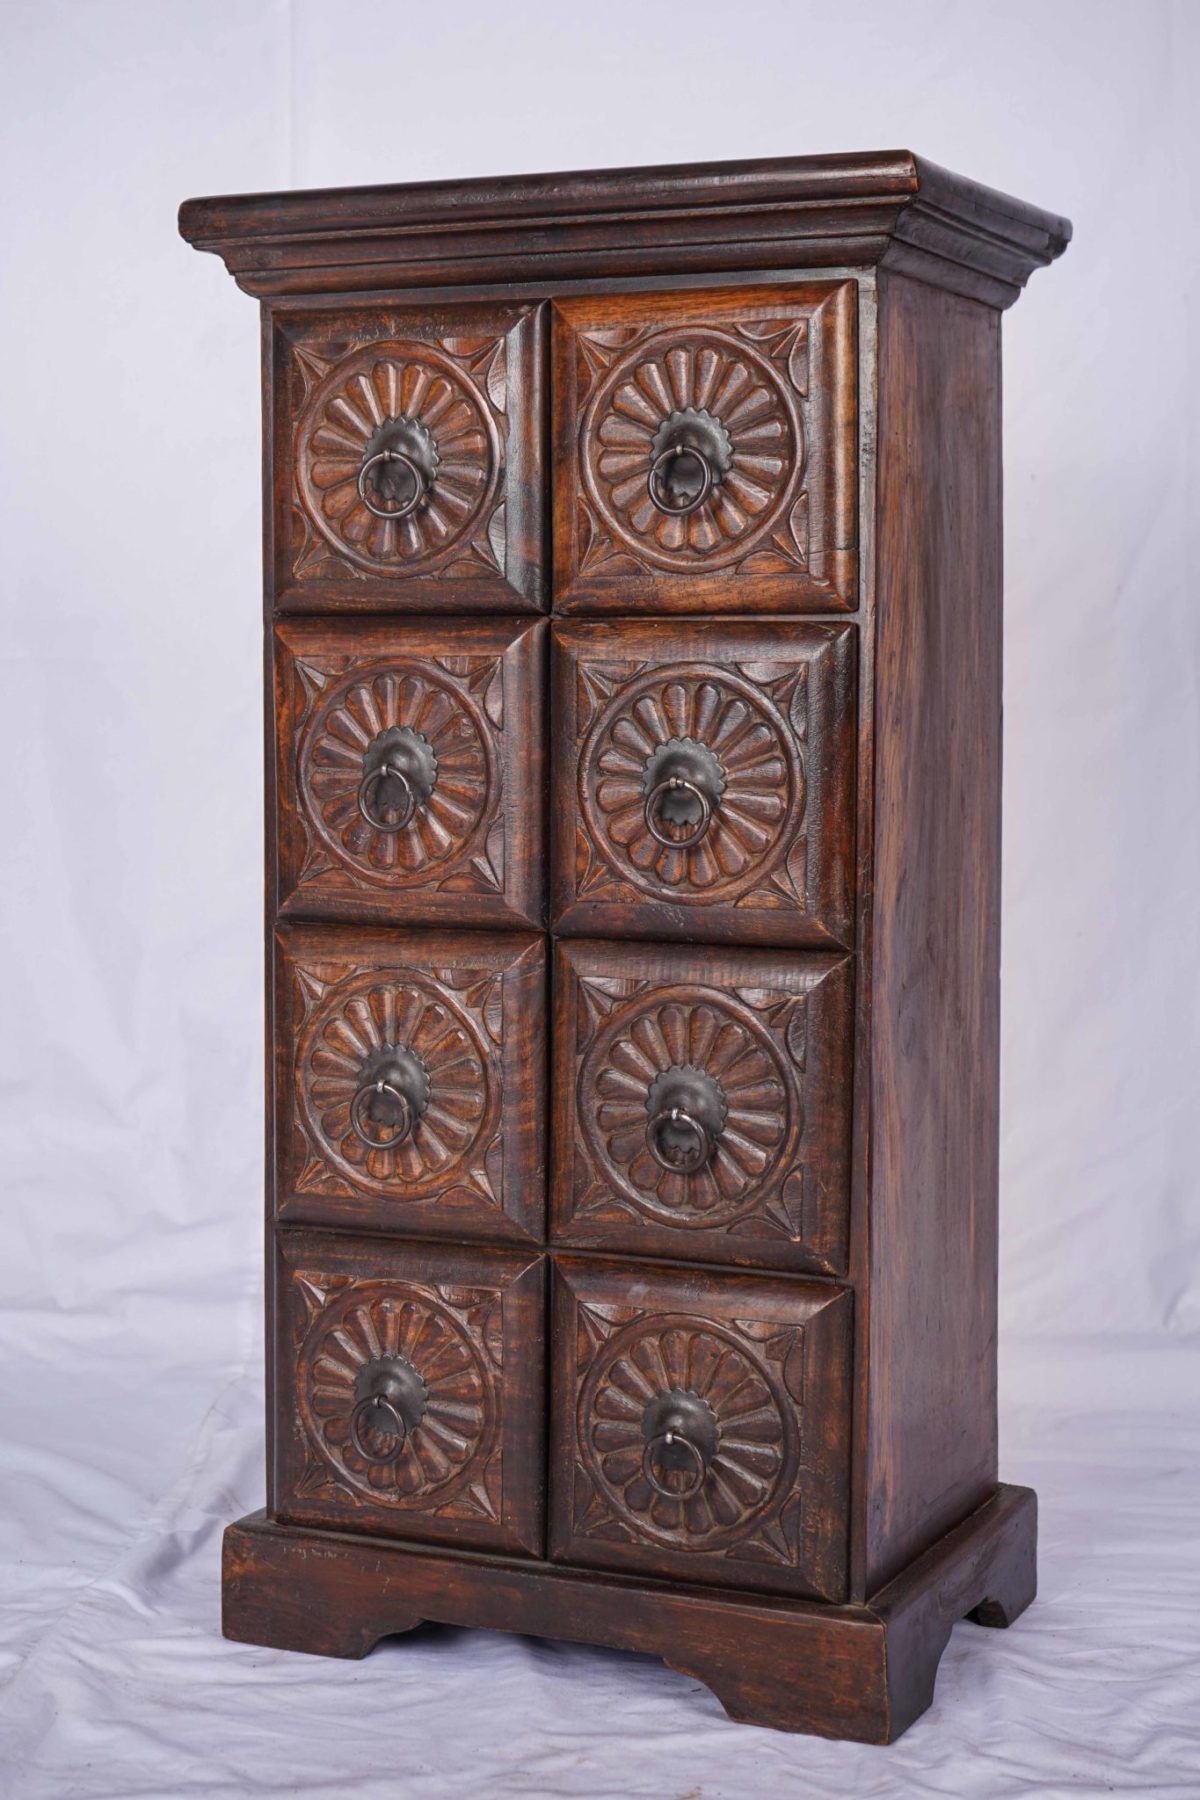 Narrow Tall Cabinet with Drawers Hand Carved Wood Furniture